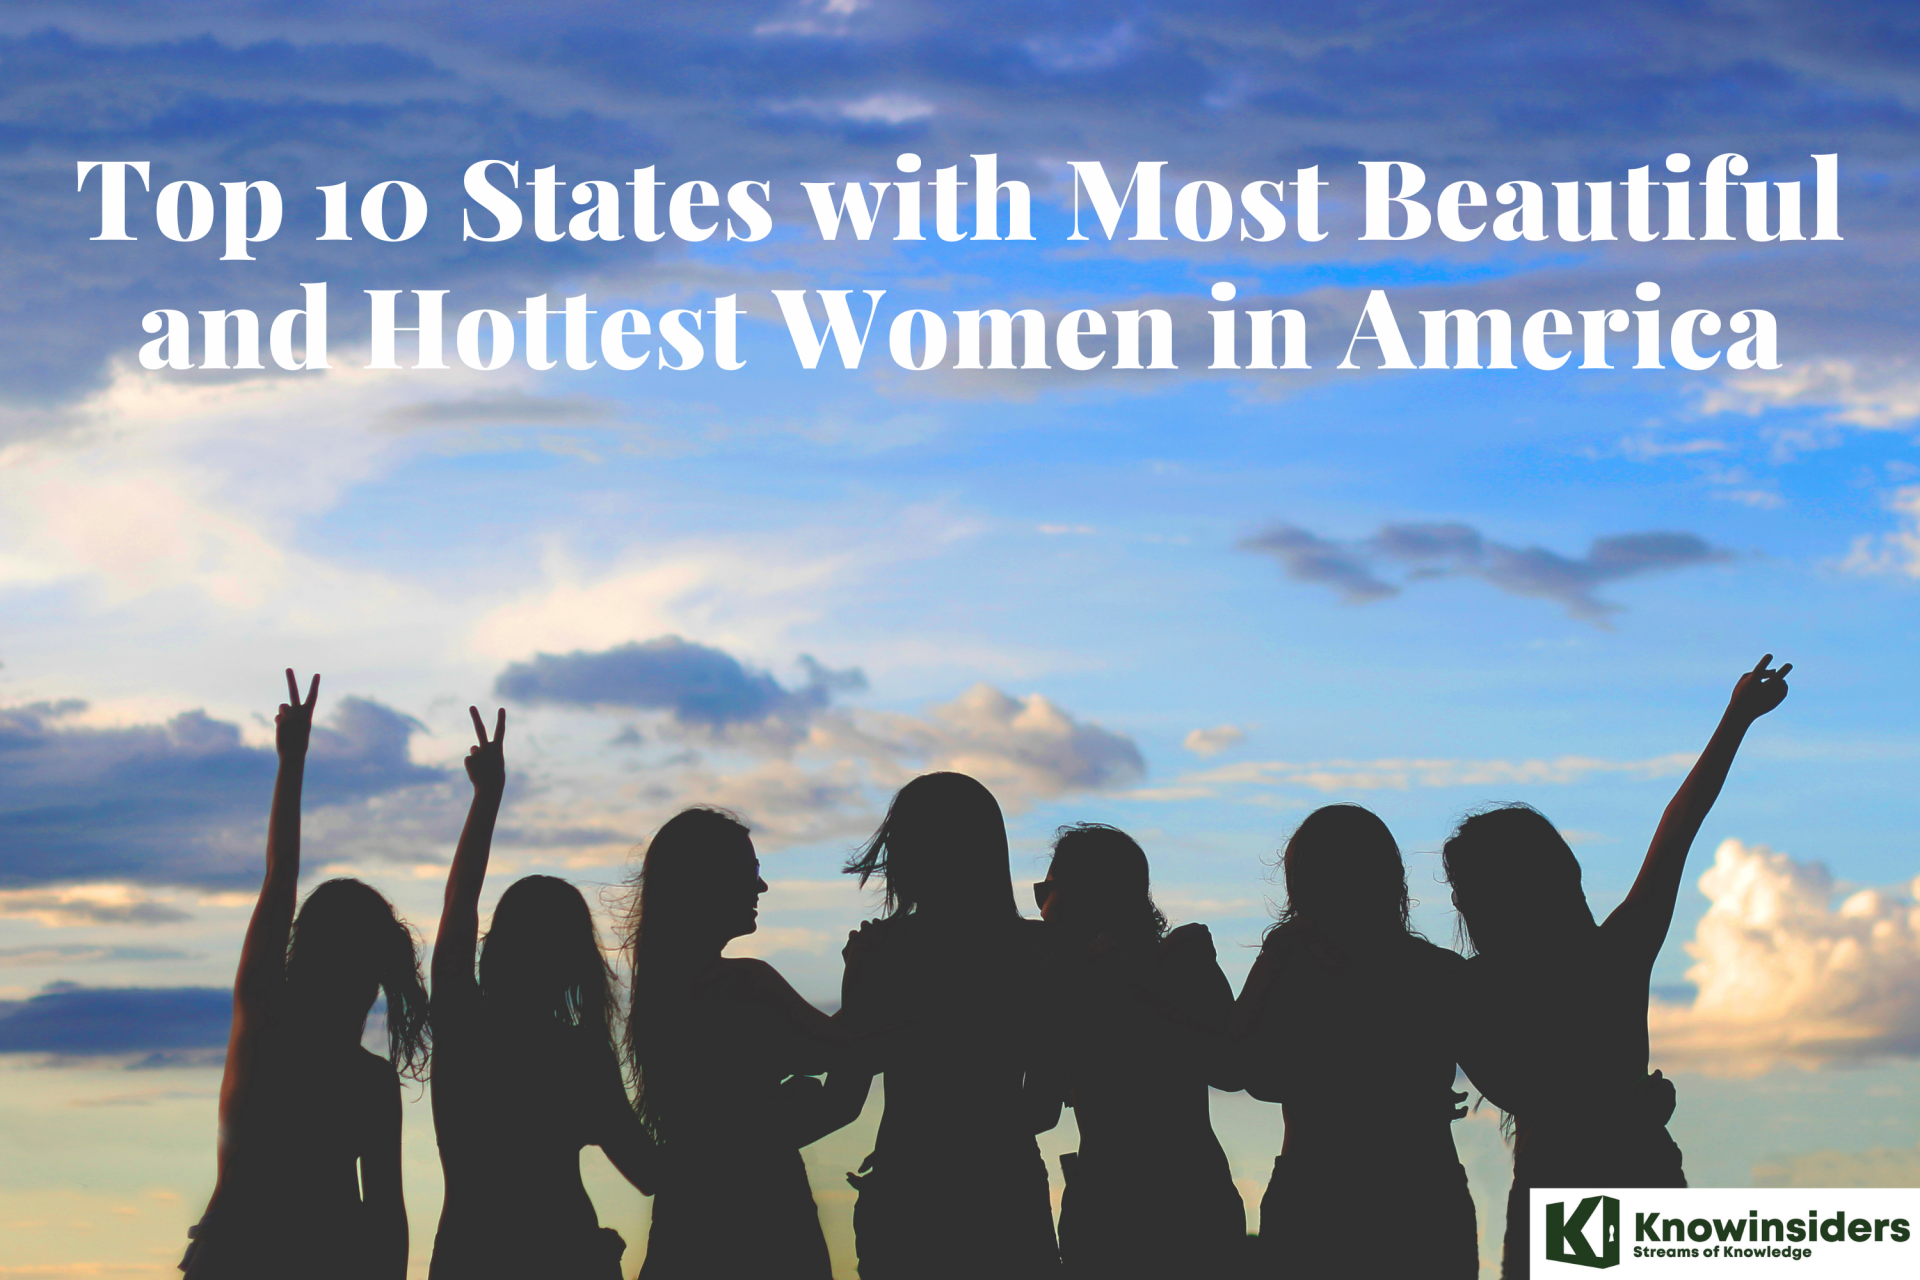 Top 10 States with the Most Beautiful Women in America